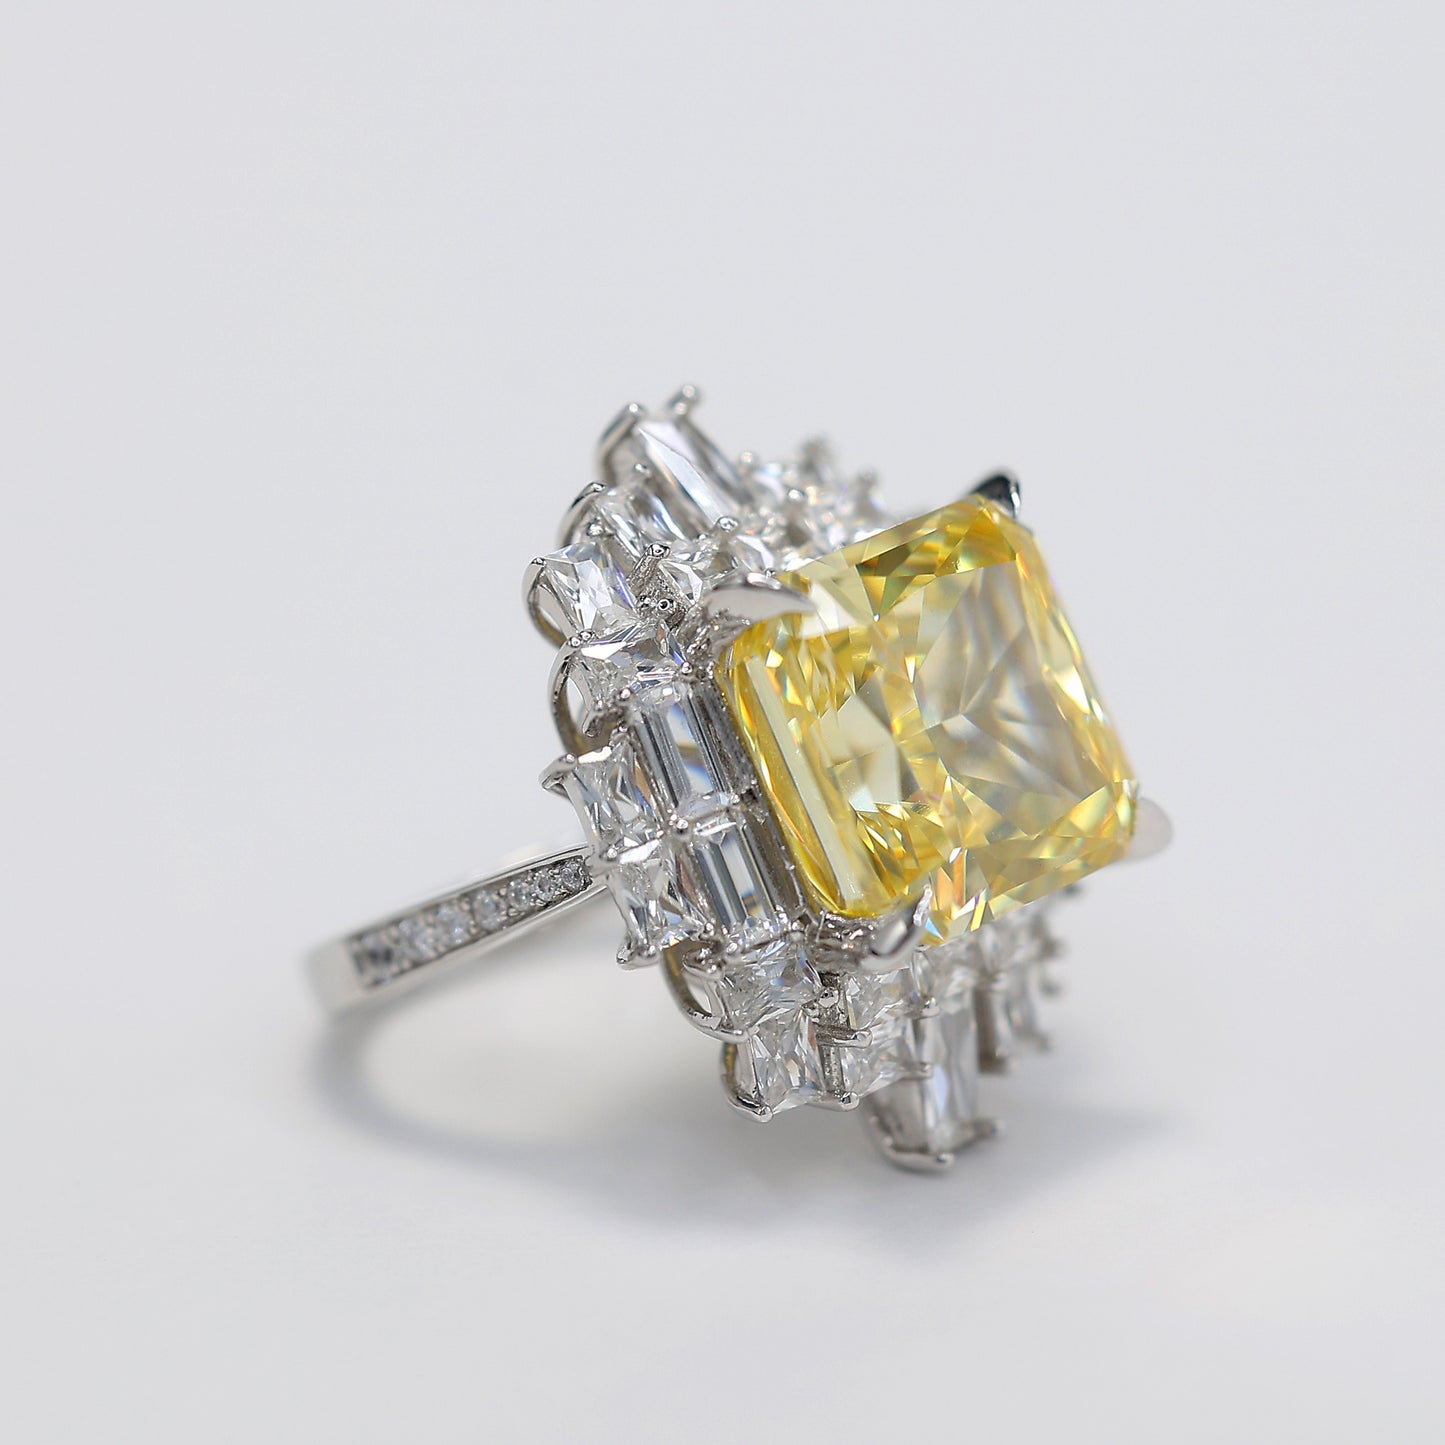 Micro-setting yellow diamond color Lab created stones city reflection ring, sterling silver